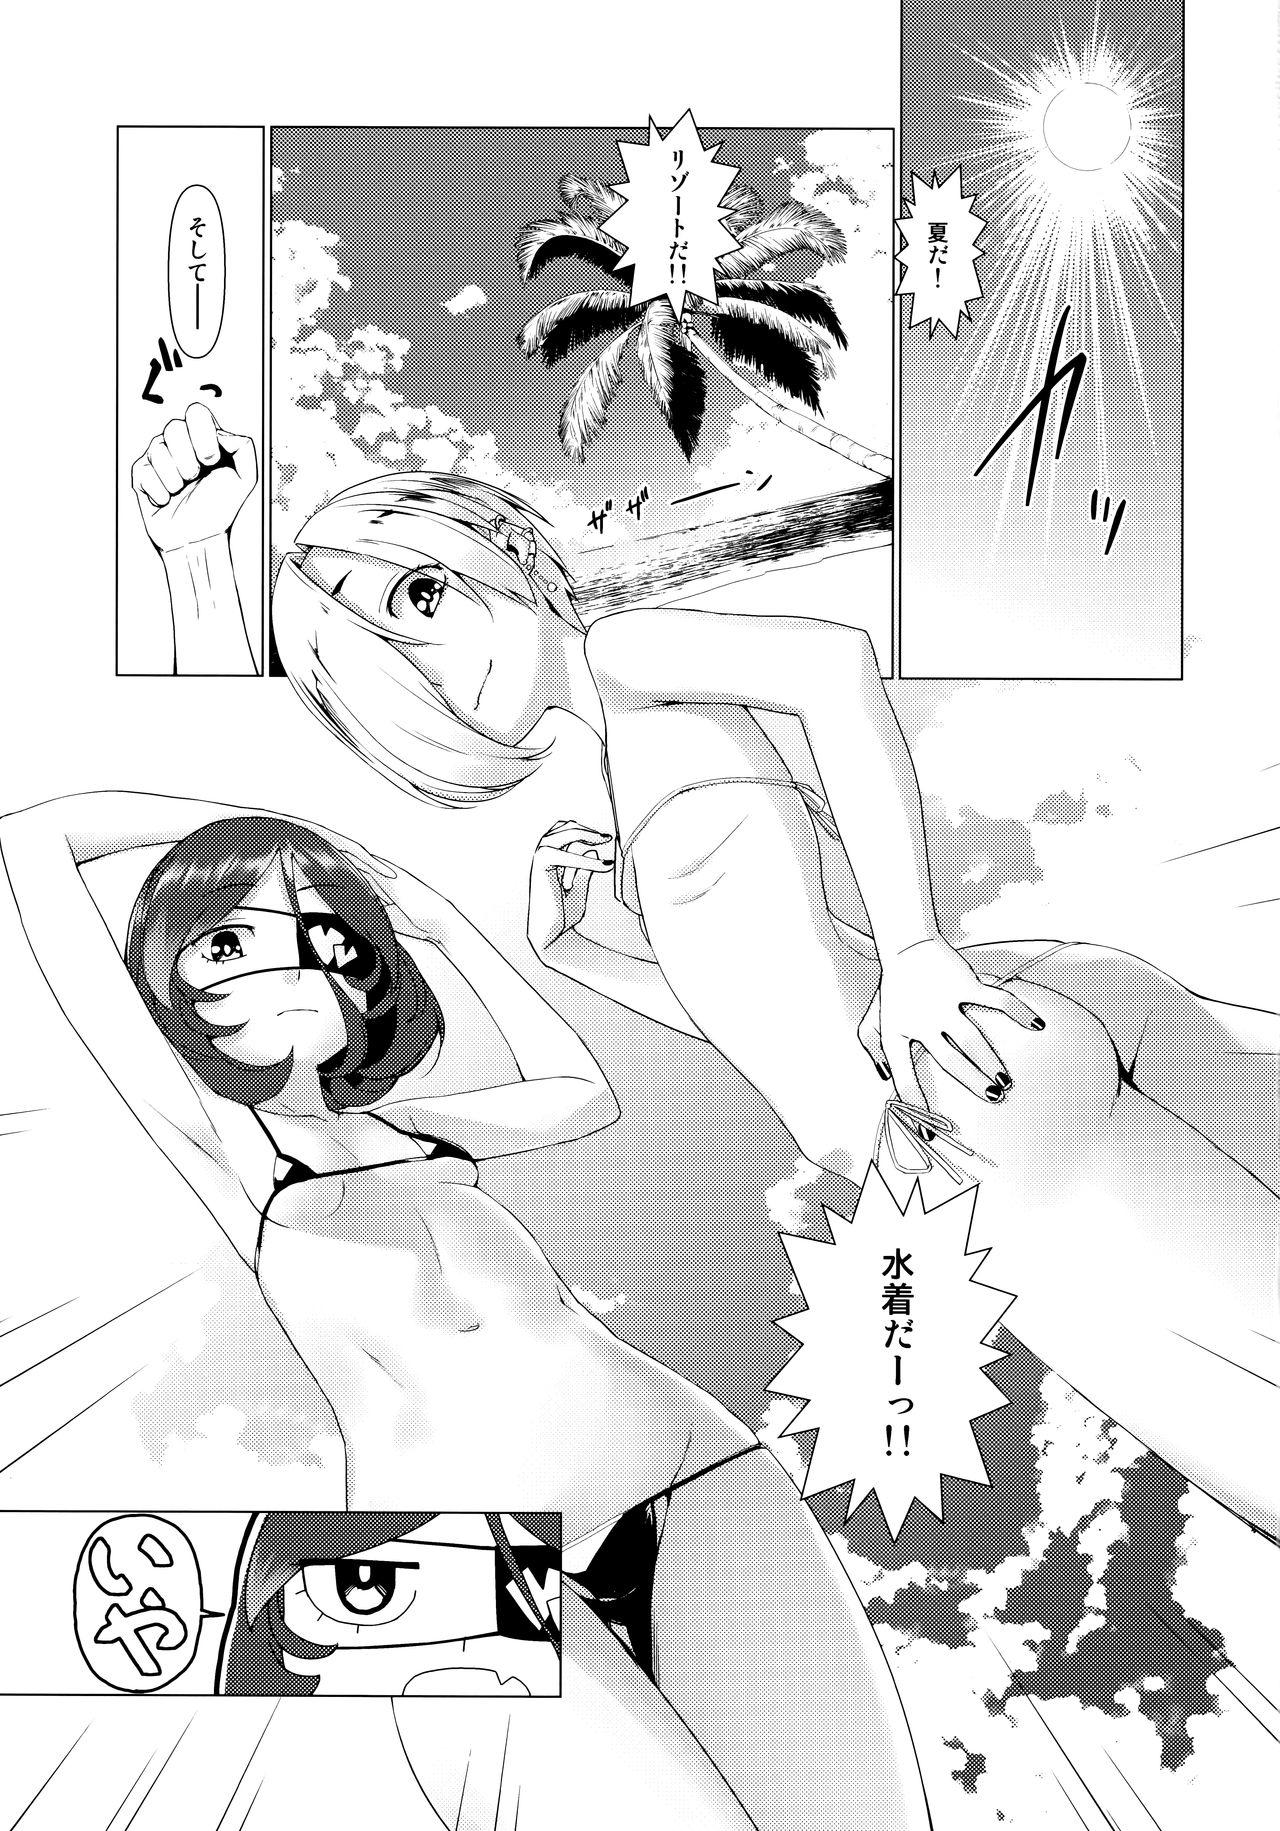 Relax Summer Vacation! Director's cut - The idolmaster Flaquita - Page 3